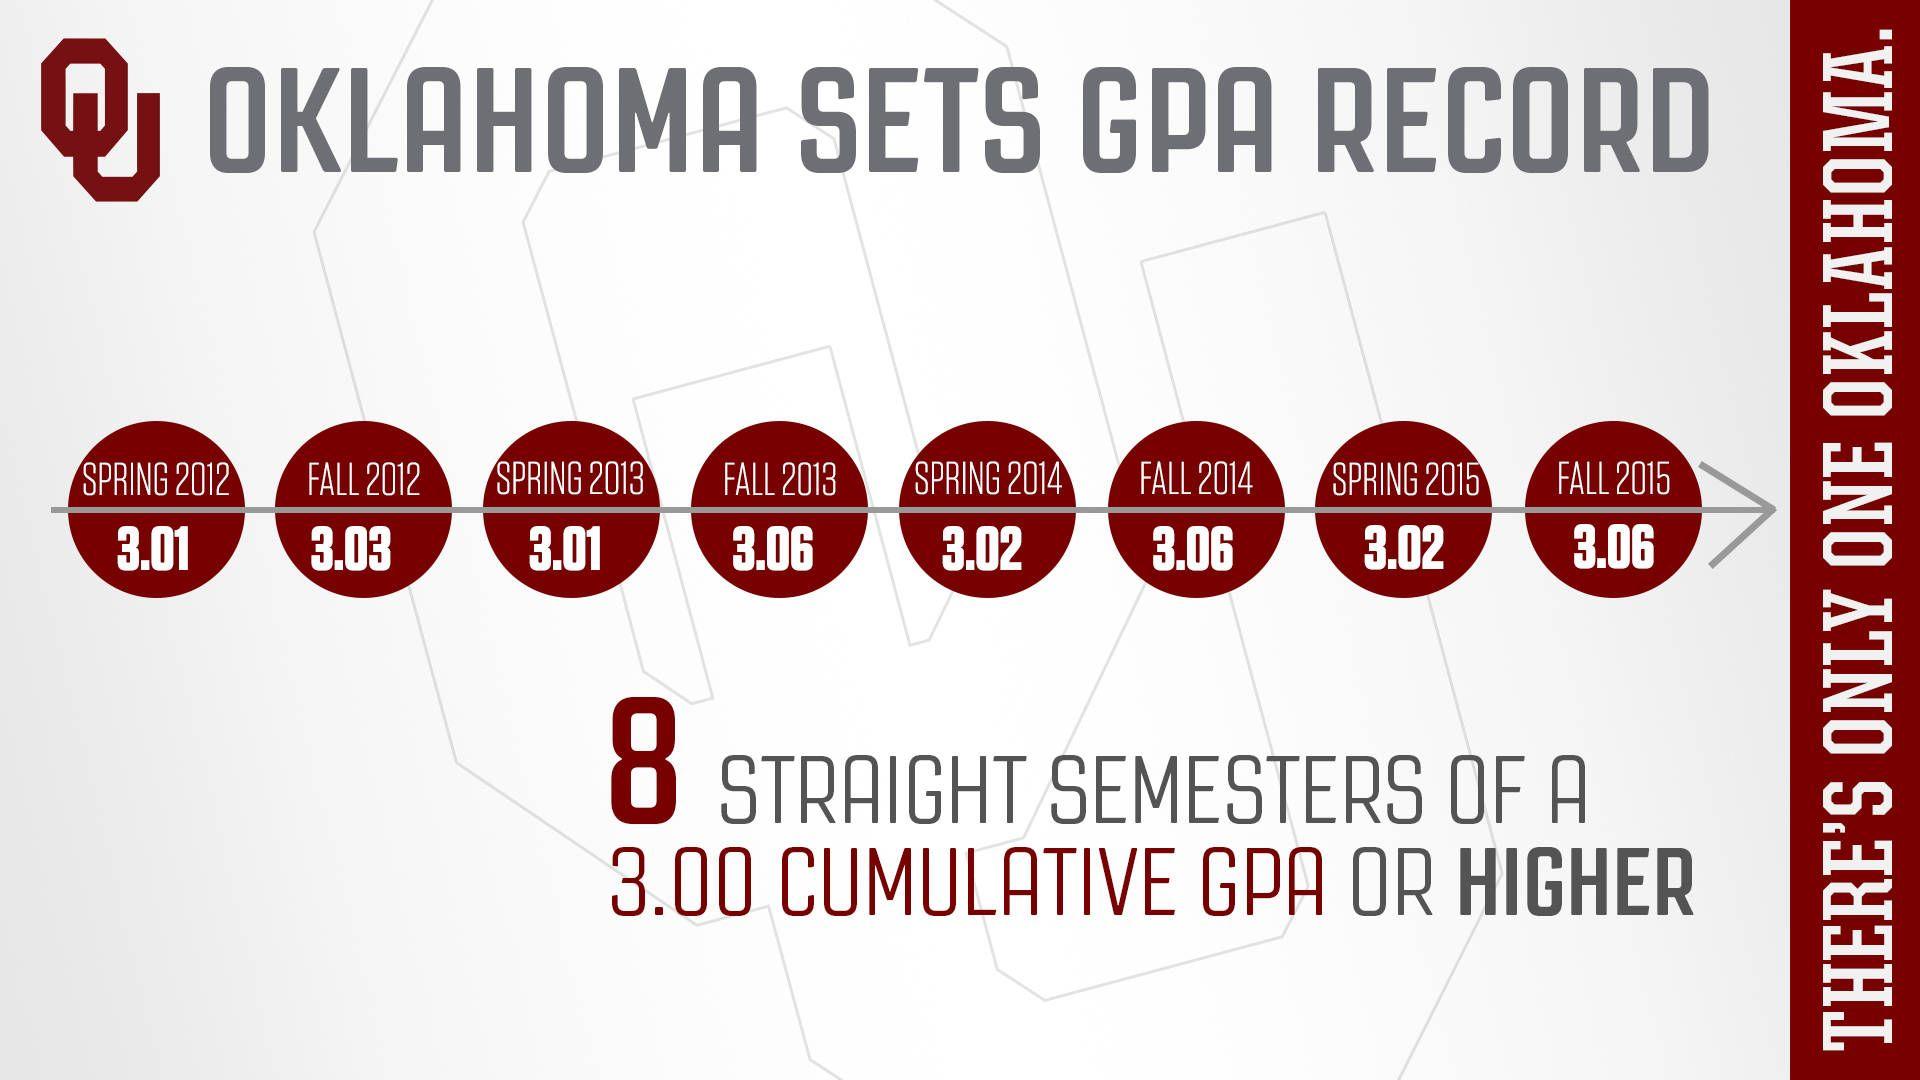 OU Athletics Sets GPA Record, Ties Another